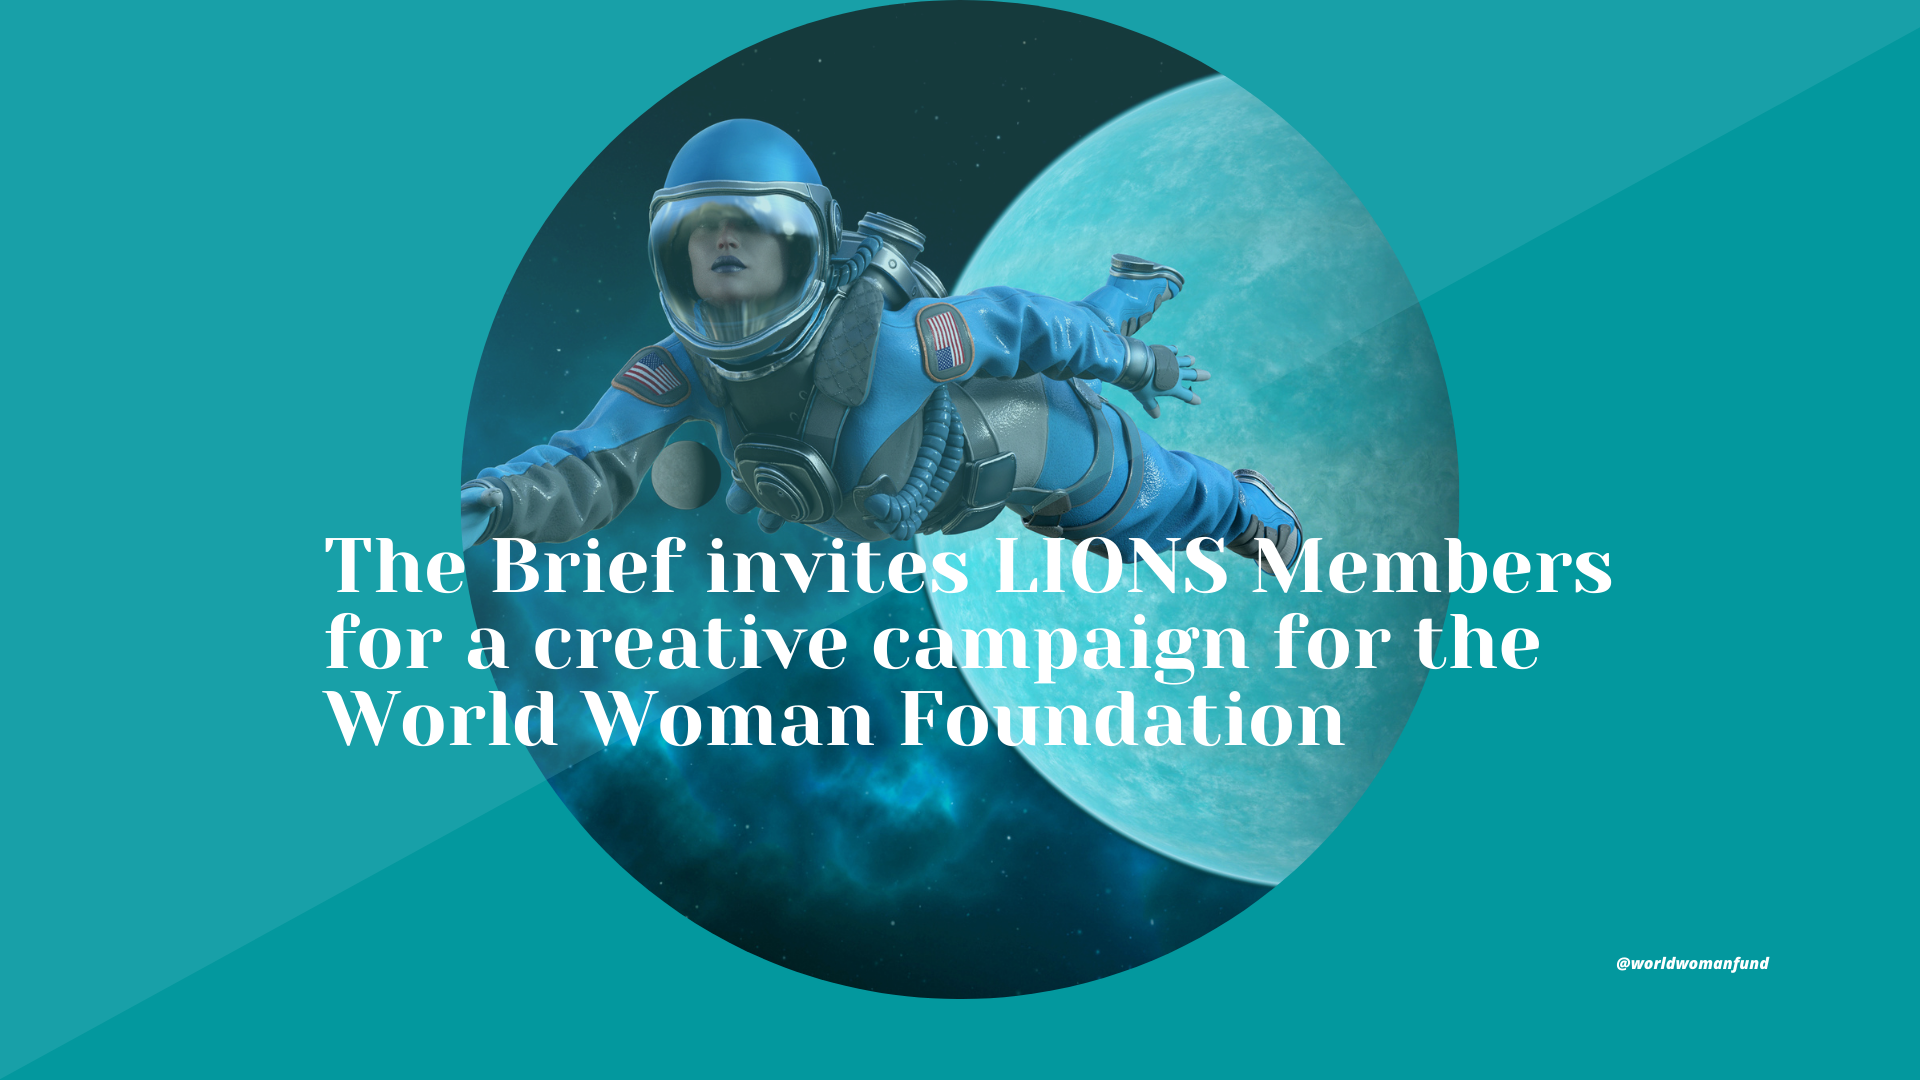 The Brief invites LIONS Members across the world to come together to create a progress-driving creative campaign for the World Woman Foundation